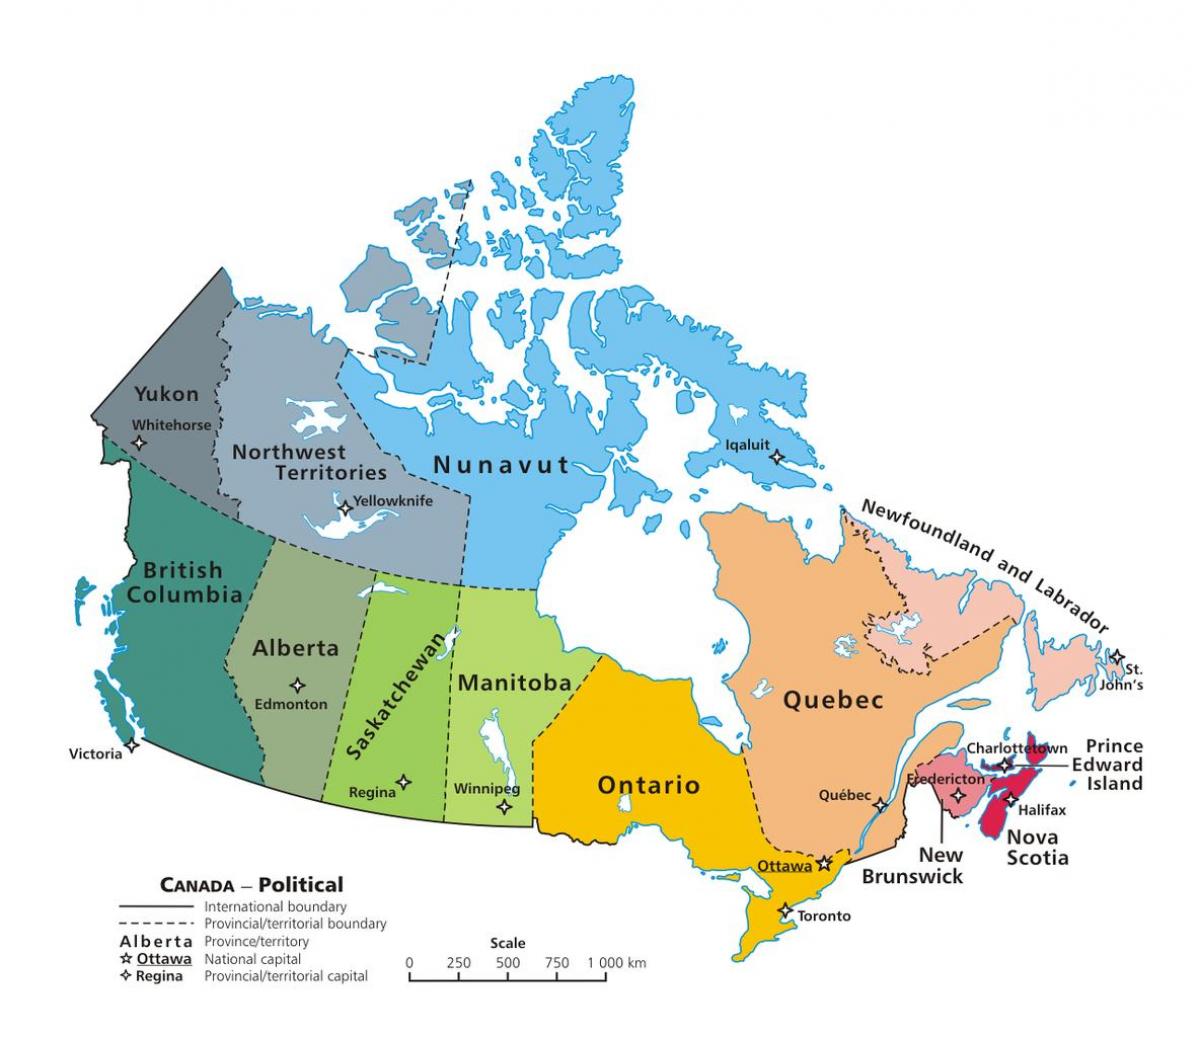 map of Canada showing provinces and territories